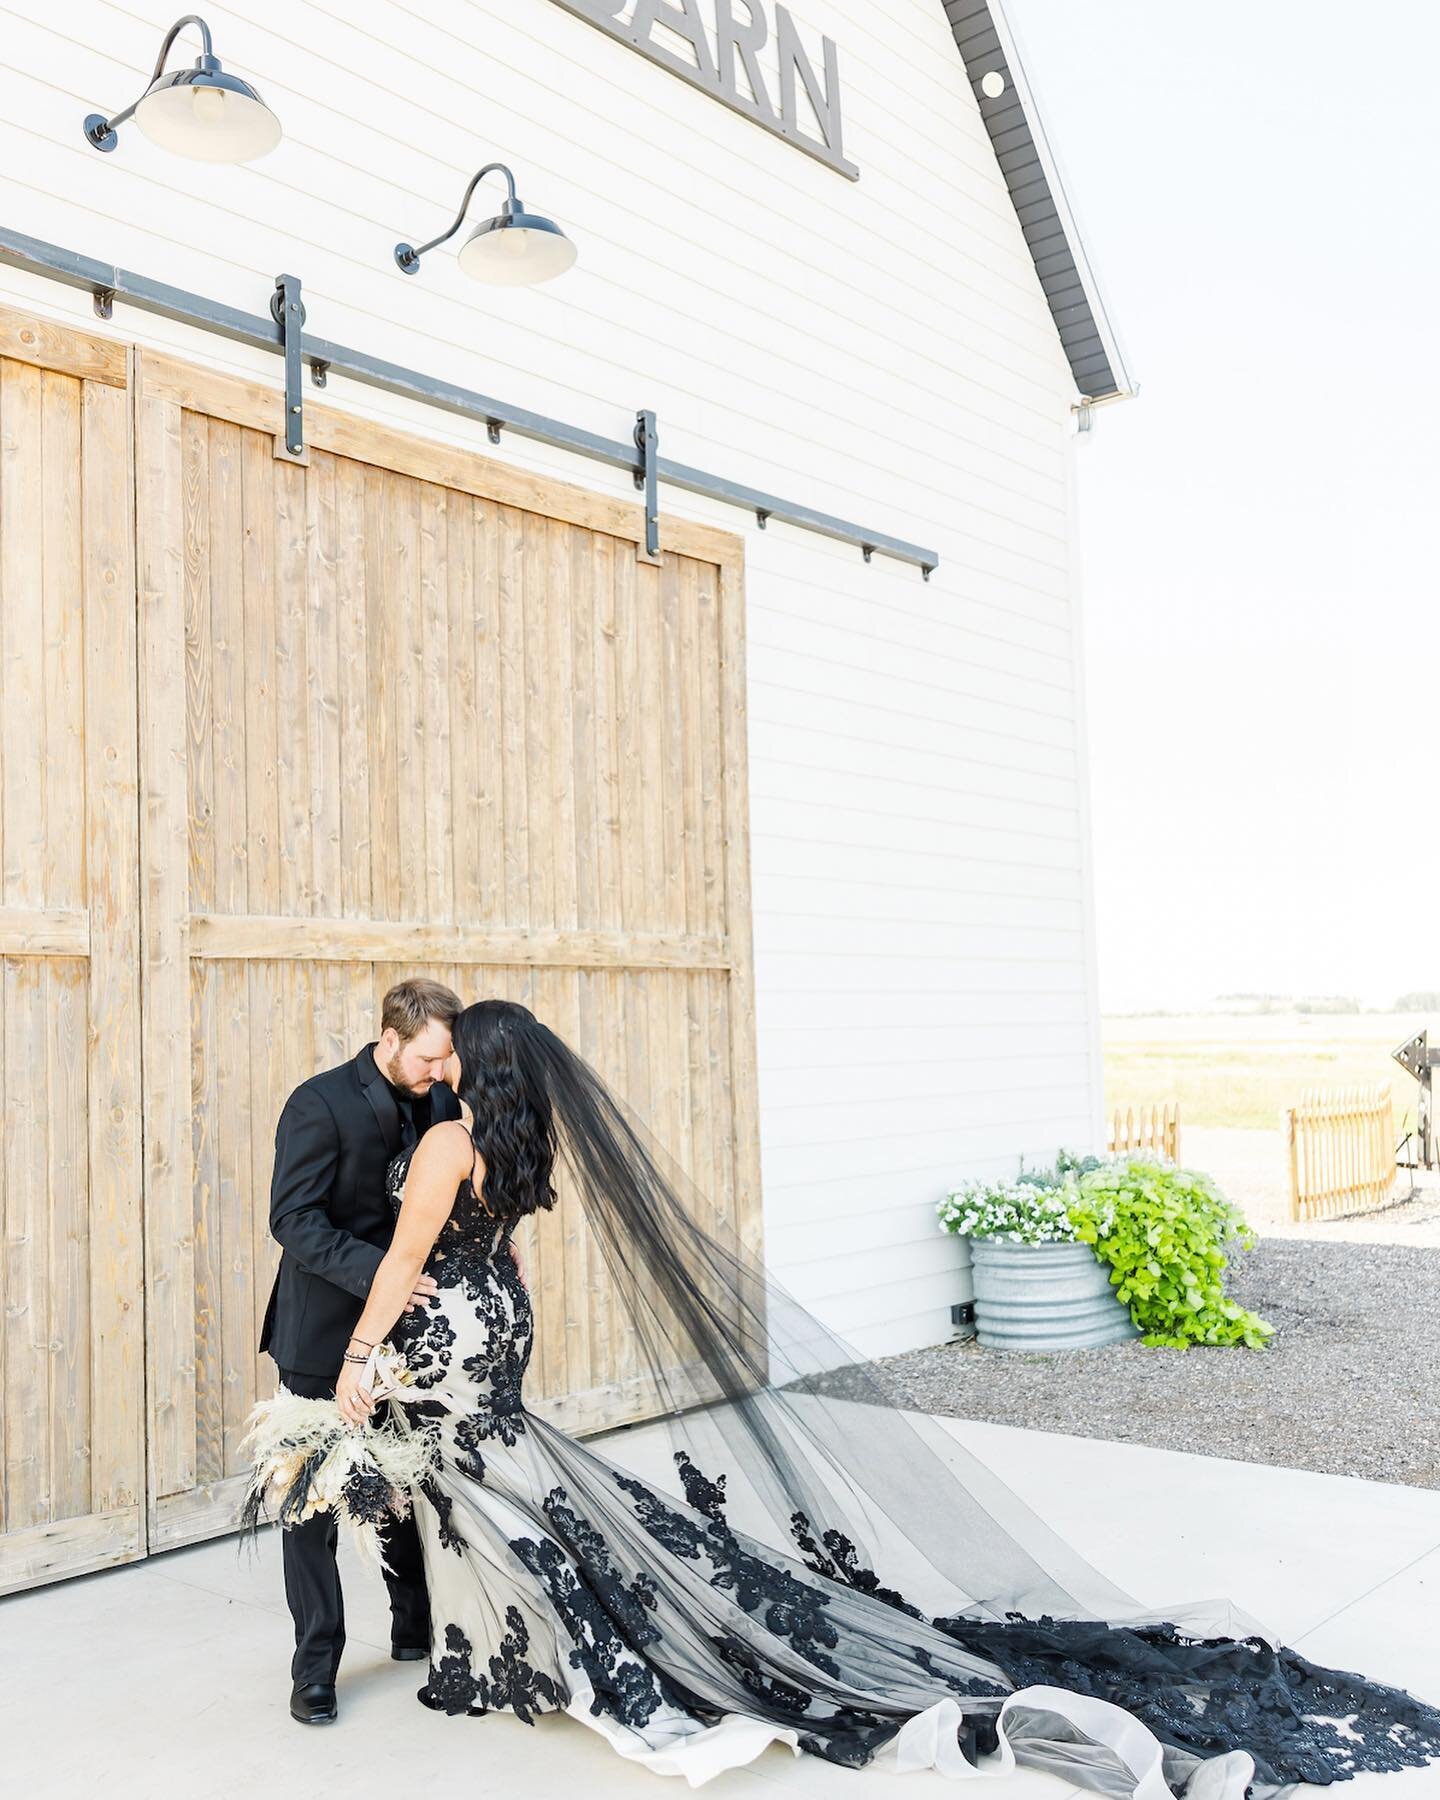 Our Cocktail Hour and Open House is this Saturday from 4-6 pm! 

We're so excited to welcome all of our past and current couples, inquiring couples, and vendors to The Farmhouse Barn! 

The barn will be styled by @justinstrawdesigns and @indigoblue_p